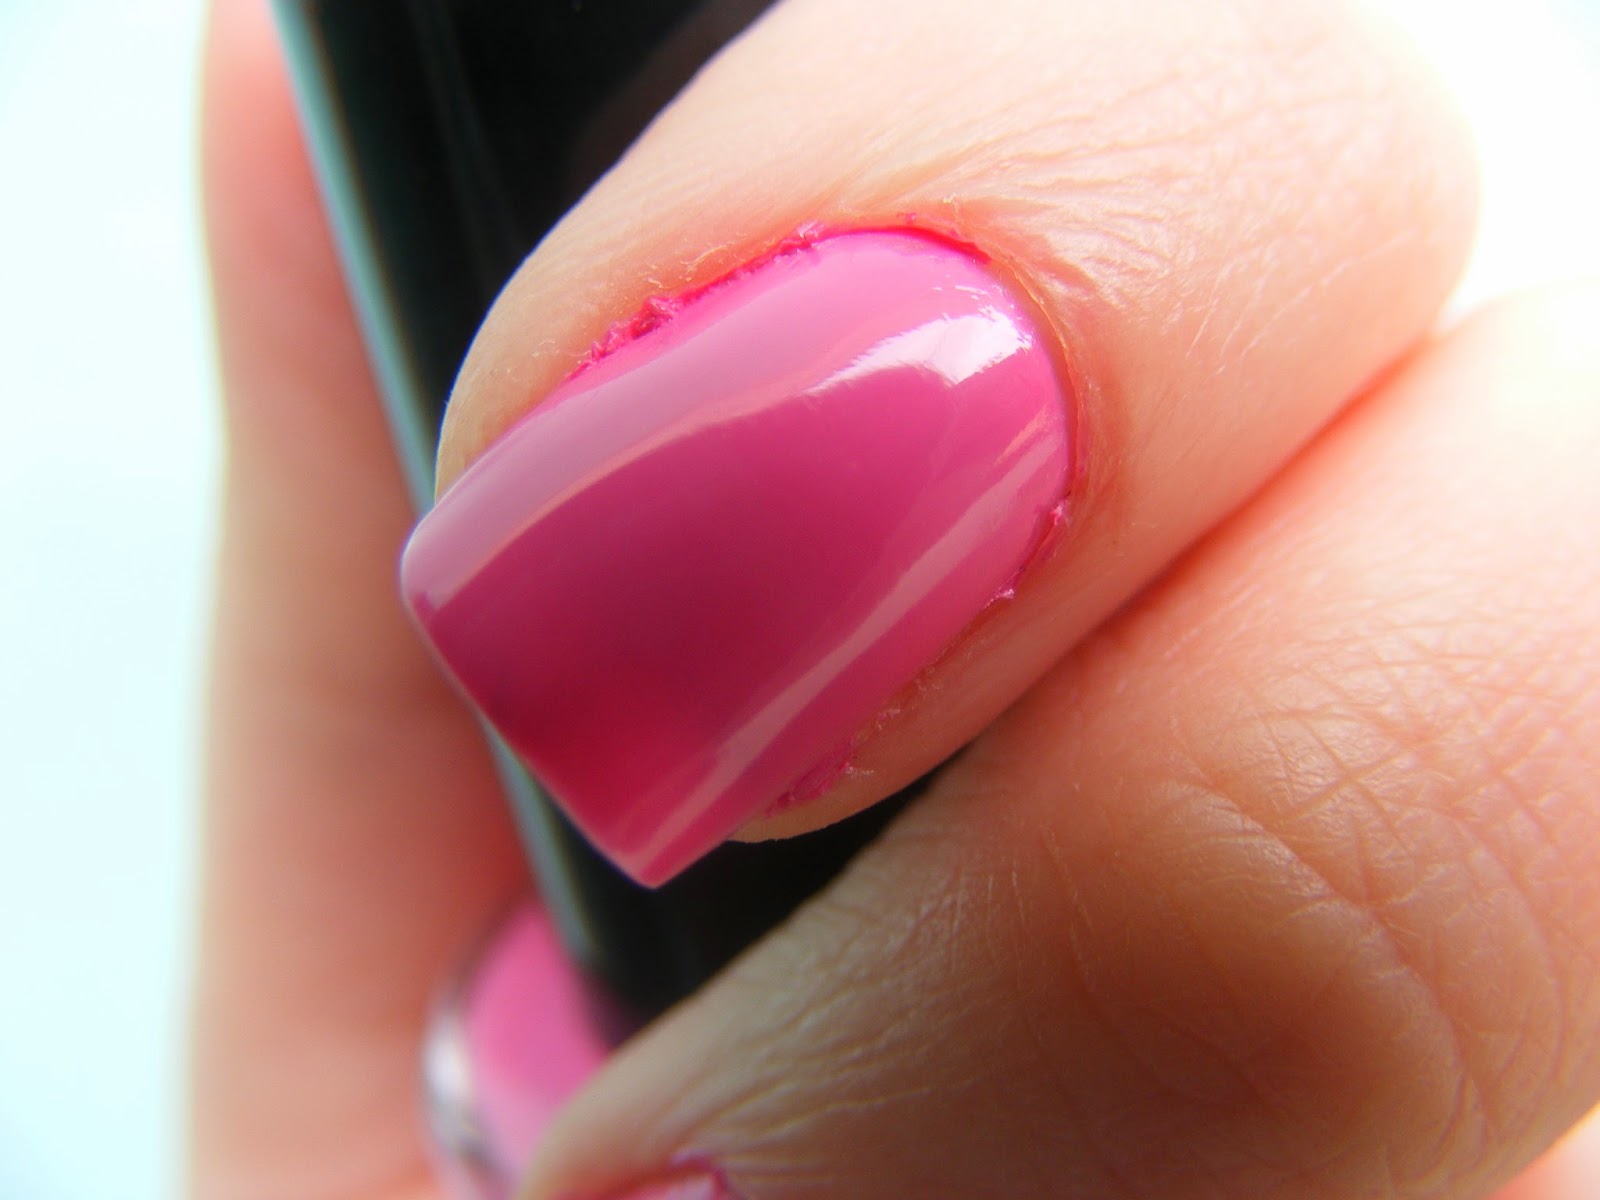 Nails Of The Day (NOTD): Pink Spring